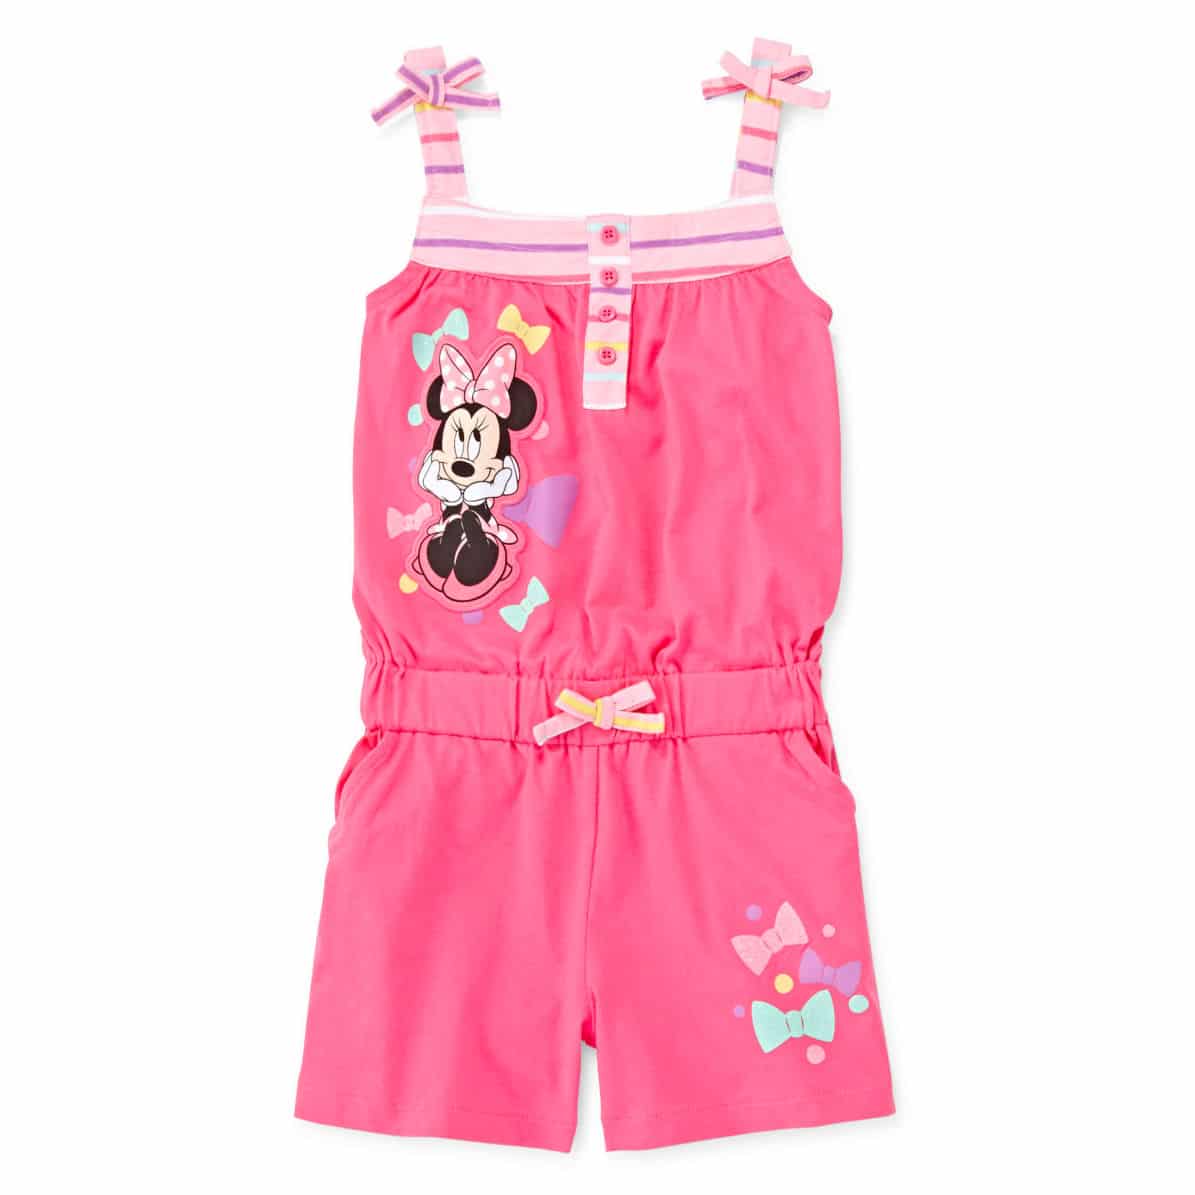 Minnie Mouse Clothes